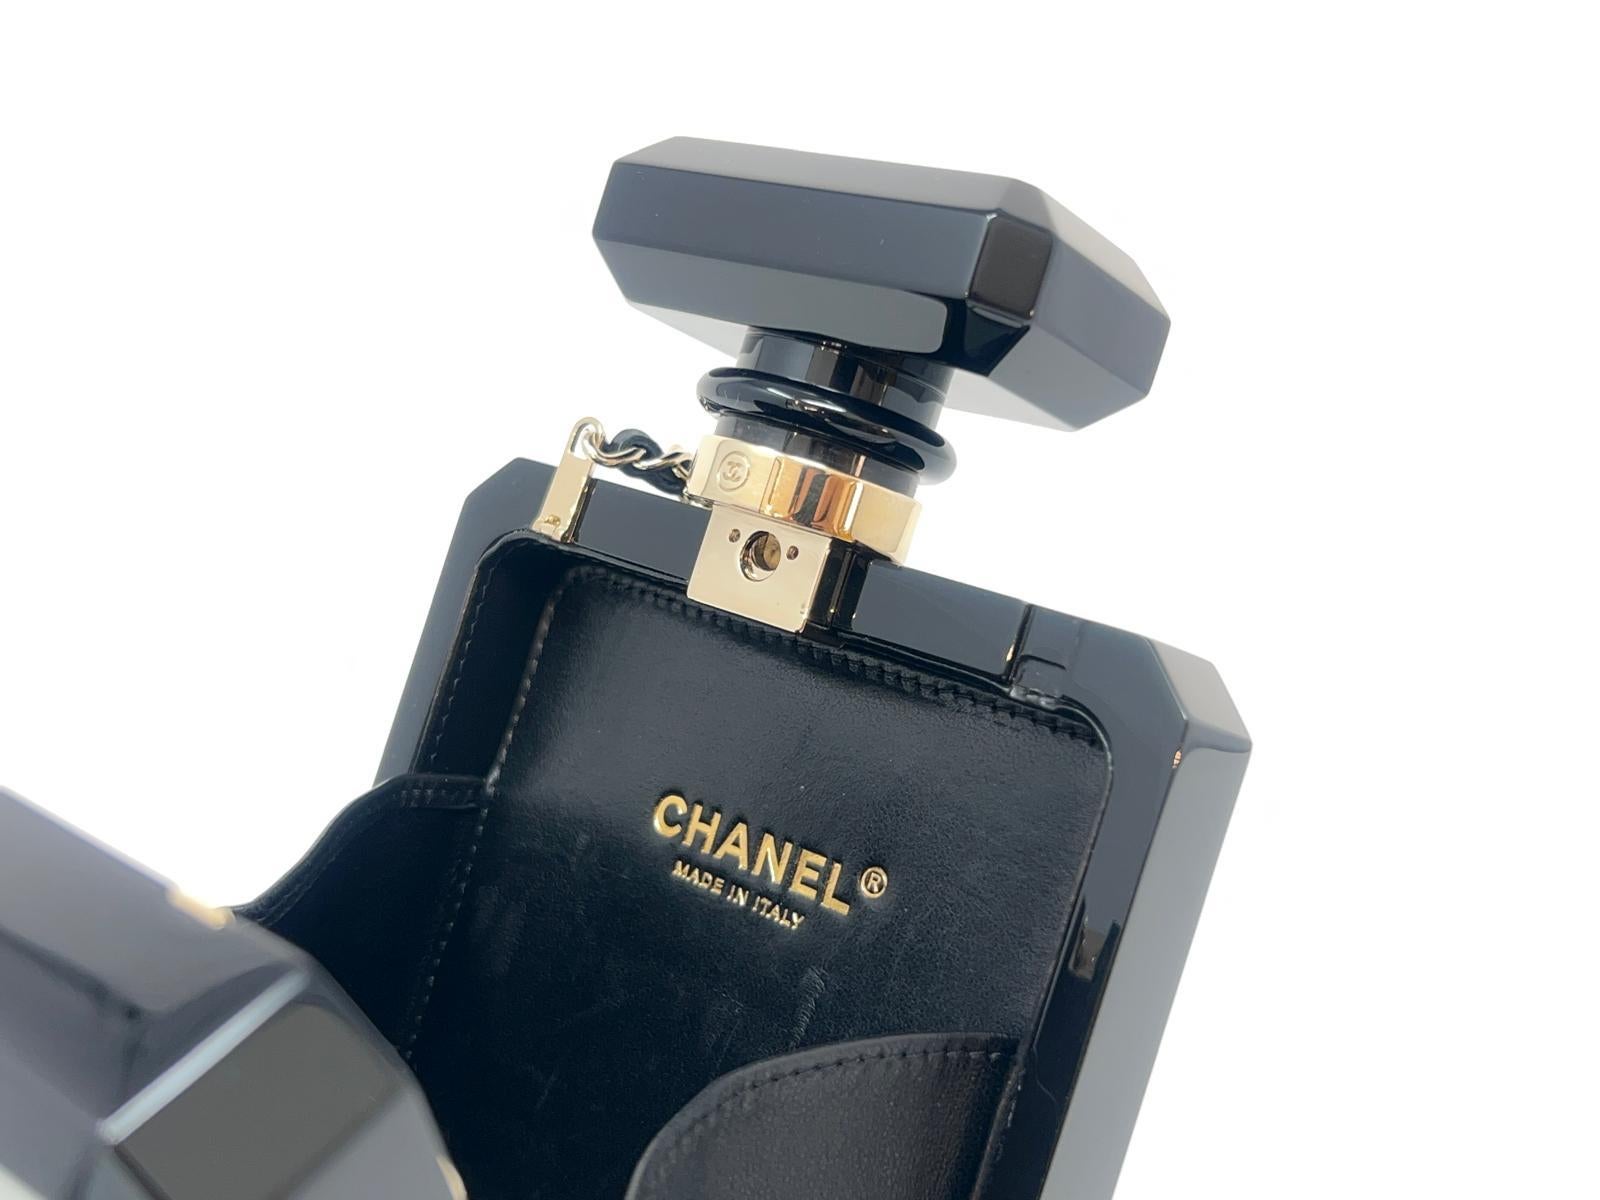 Chanel N5 Black Perfume Bottle Minaudière Cruise Collection 2013  For Sale 4